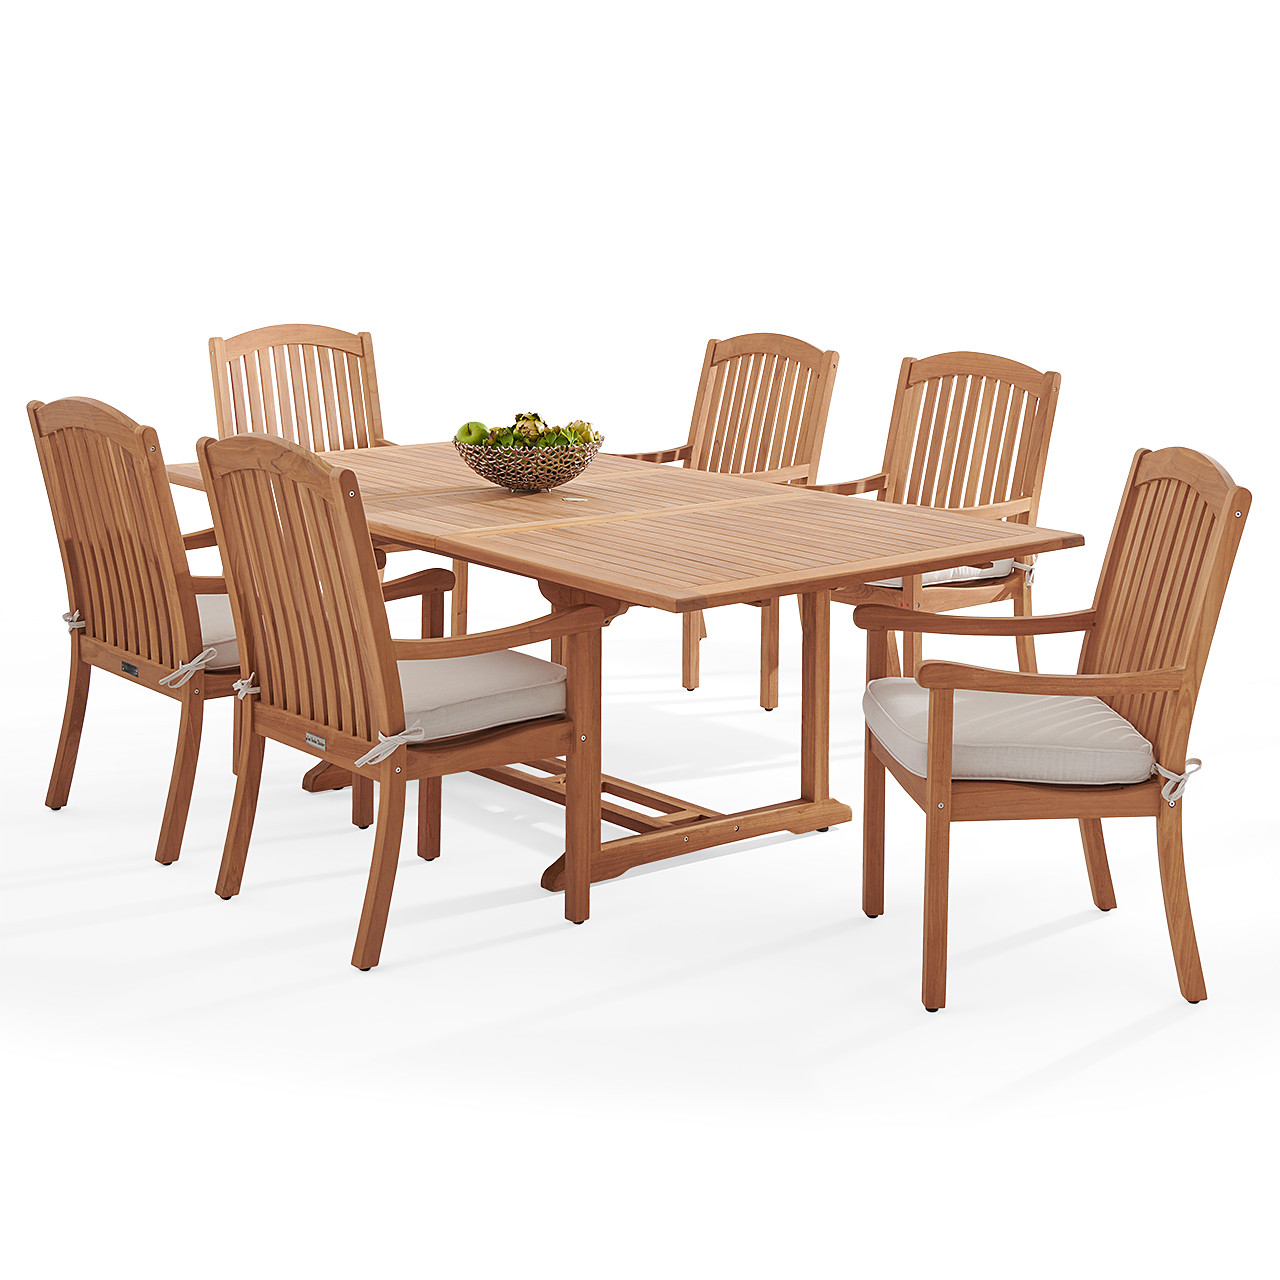 Eastchester Teak with Cushions 7 Piece Dining Set + Bristol 67-87 x 47 in. Extension Table